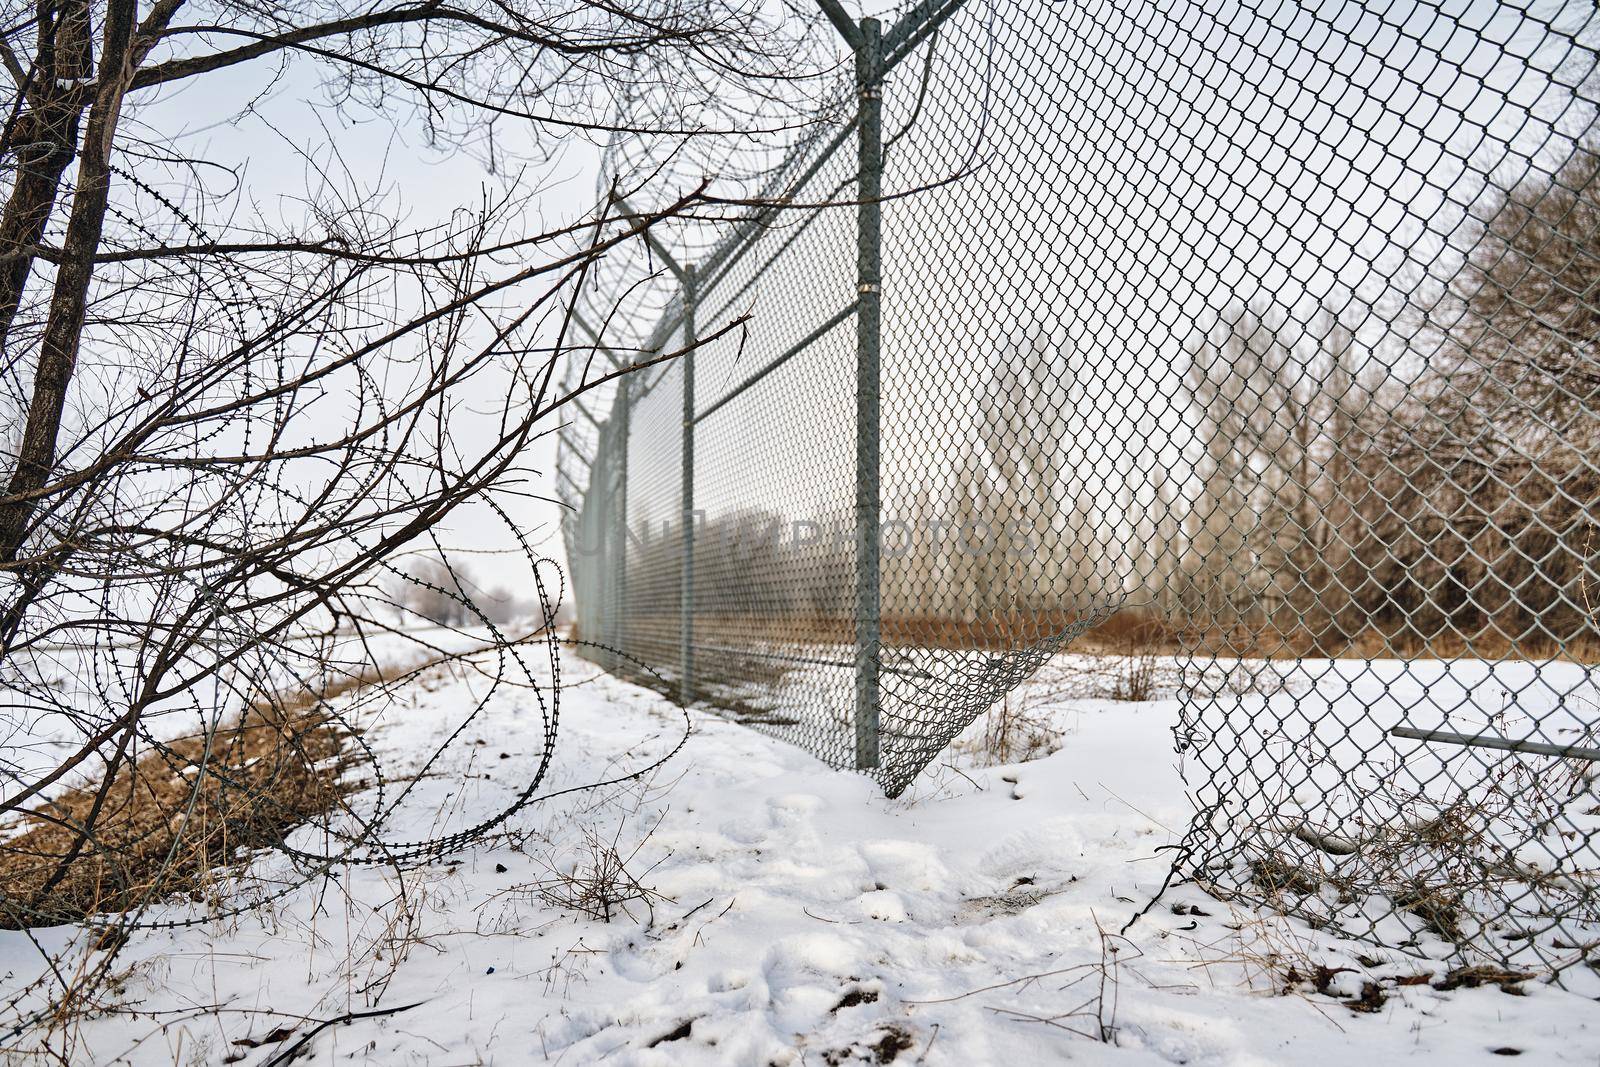 Escape from prison or closed institution for mentally ill. Hole in border fence with barbed wire. Unauthorized entry is prohibited. Maximum security detention facility. Illegal trespassing. Winter.